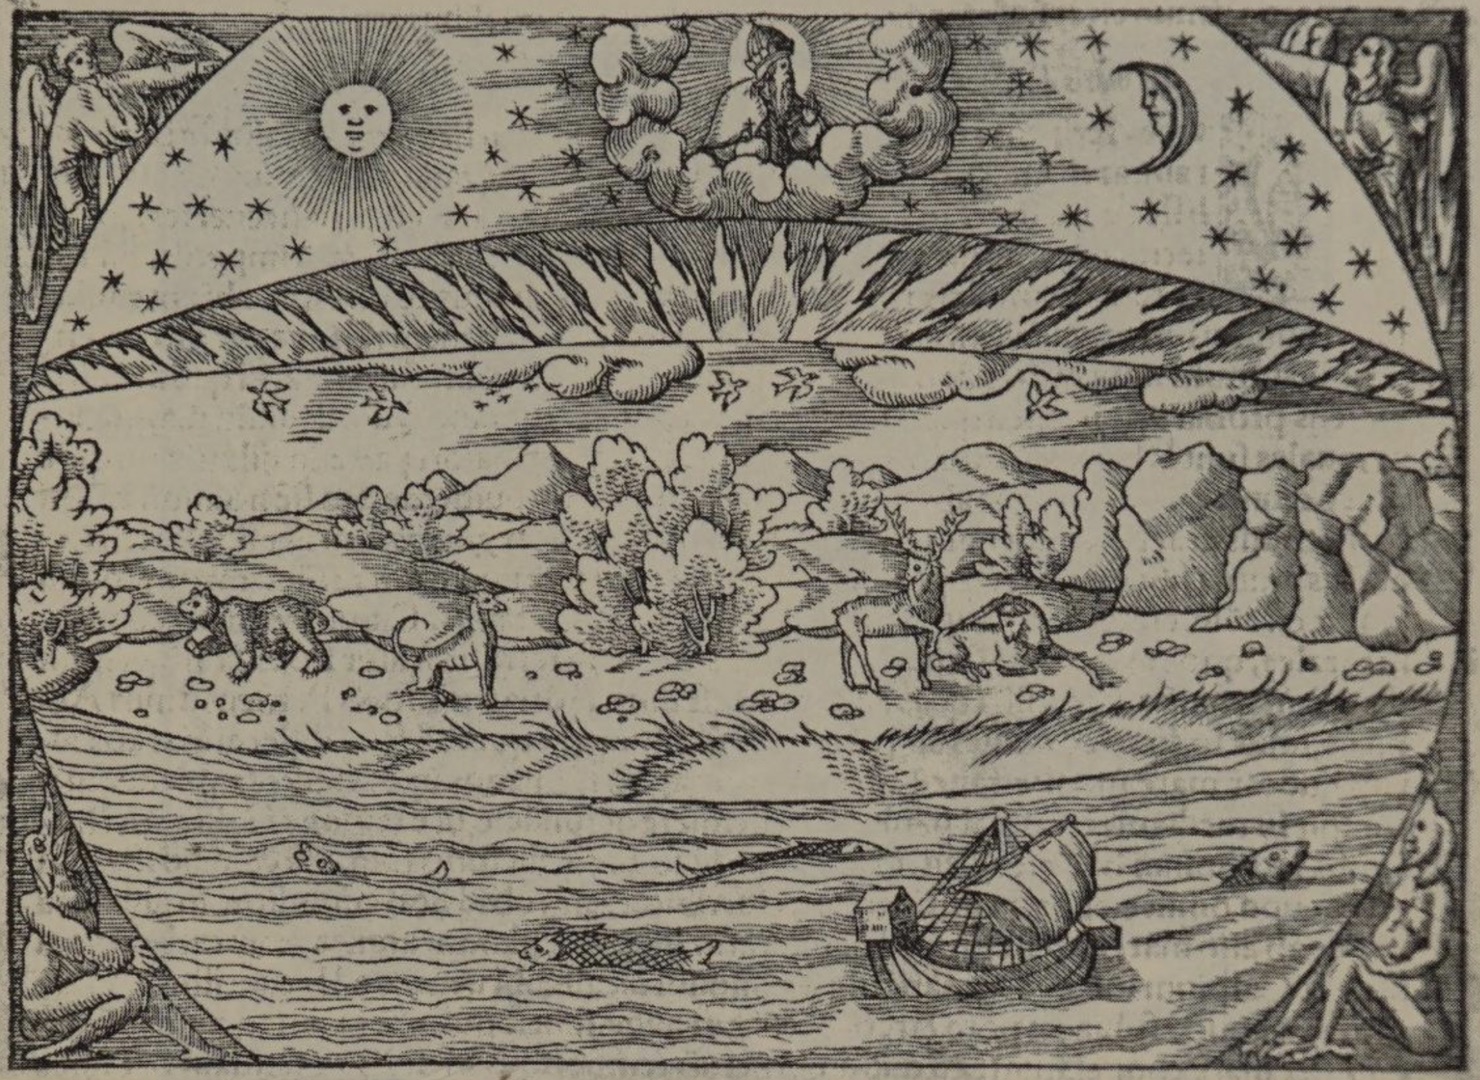 Bruno Weber and Joseph Ashbrook argued that the Flammarion engraving's depiction of a heavenly vault separating a flat Earth from an outer realm may have been inspired by this woodcut from Sebastian Münster's Cosmographia of 1544.